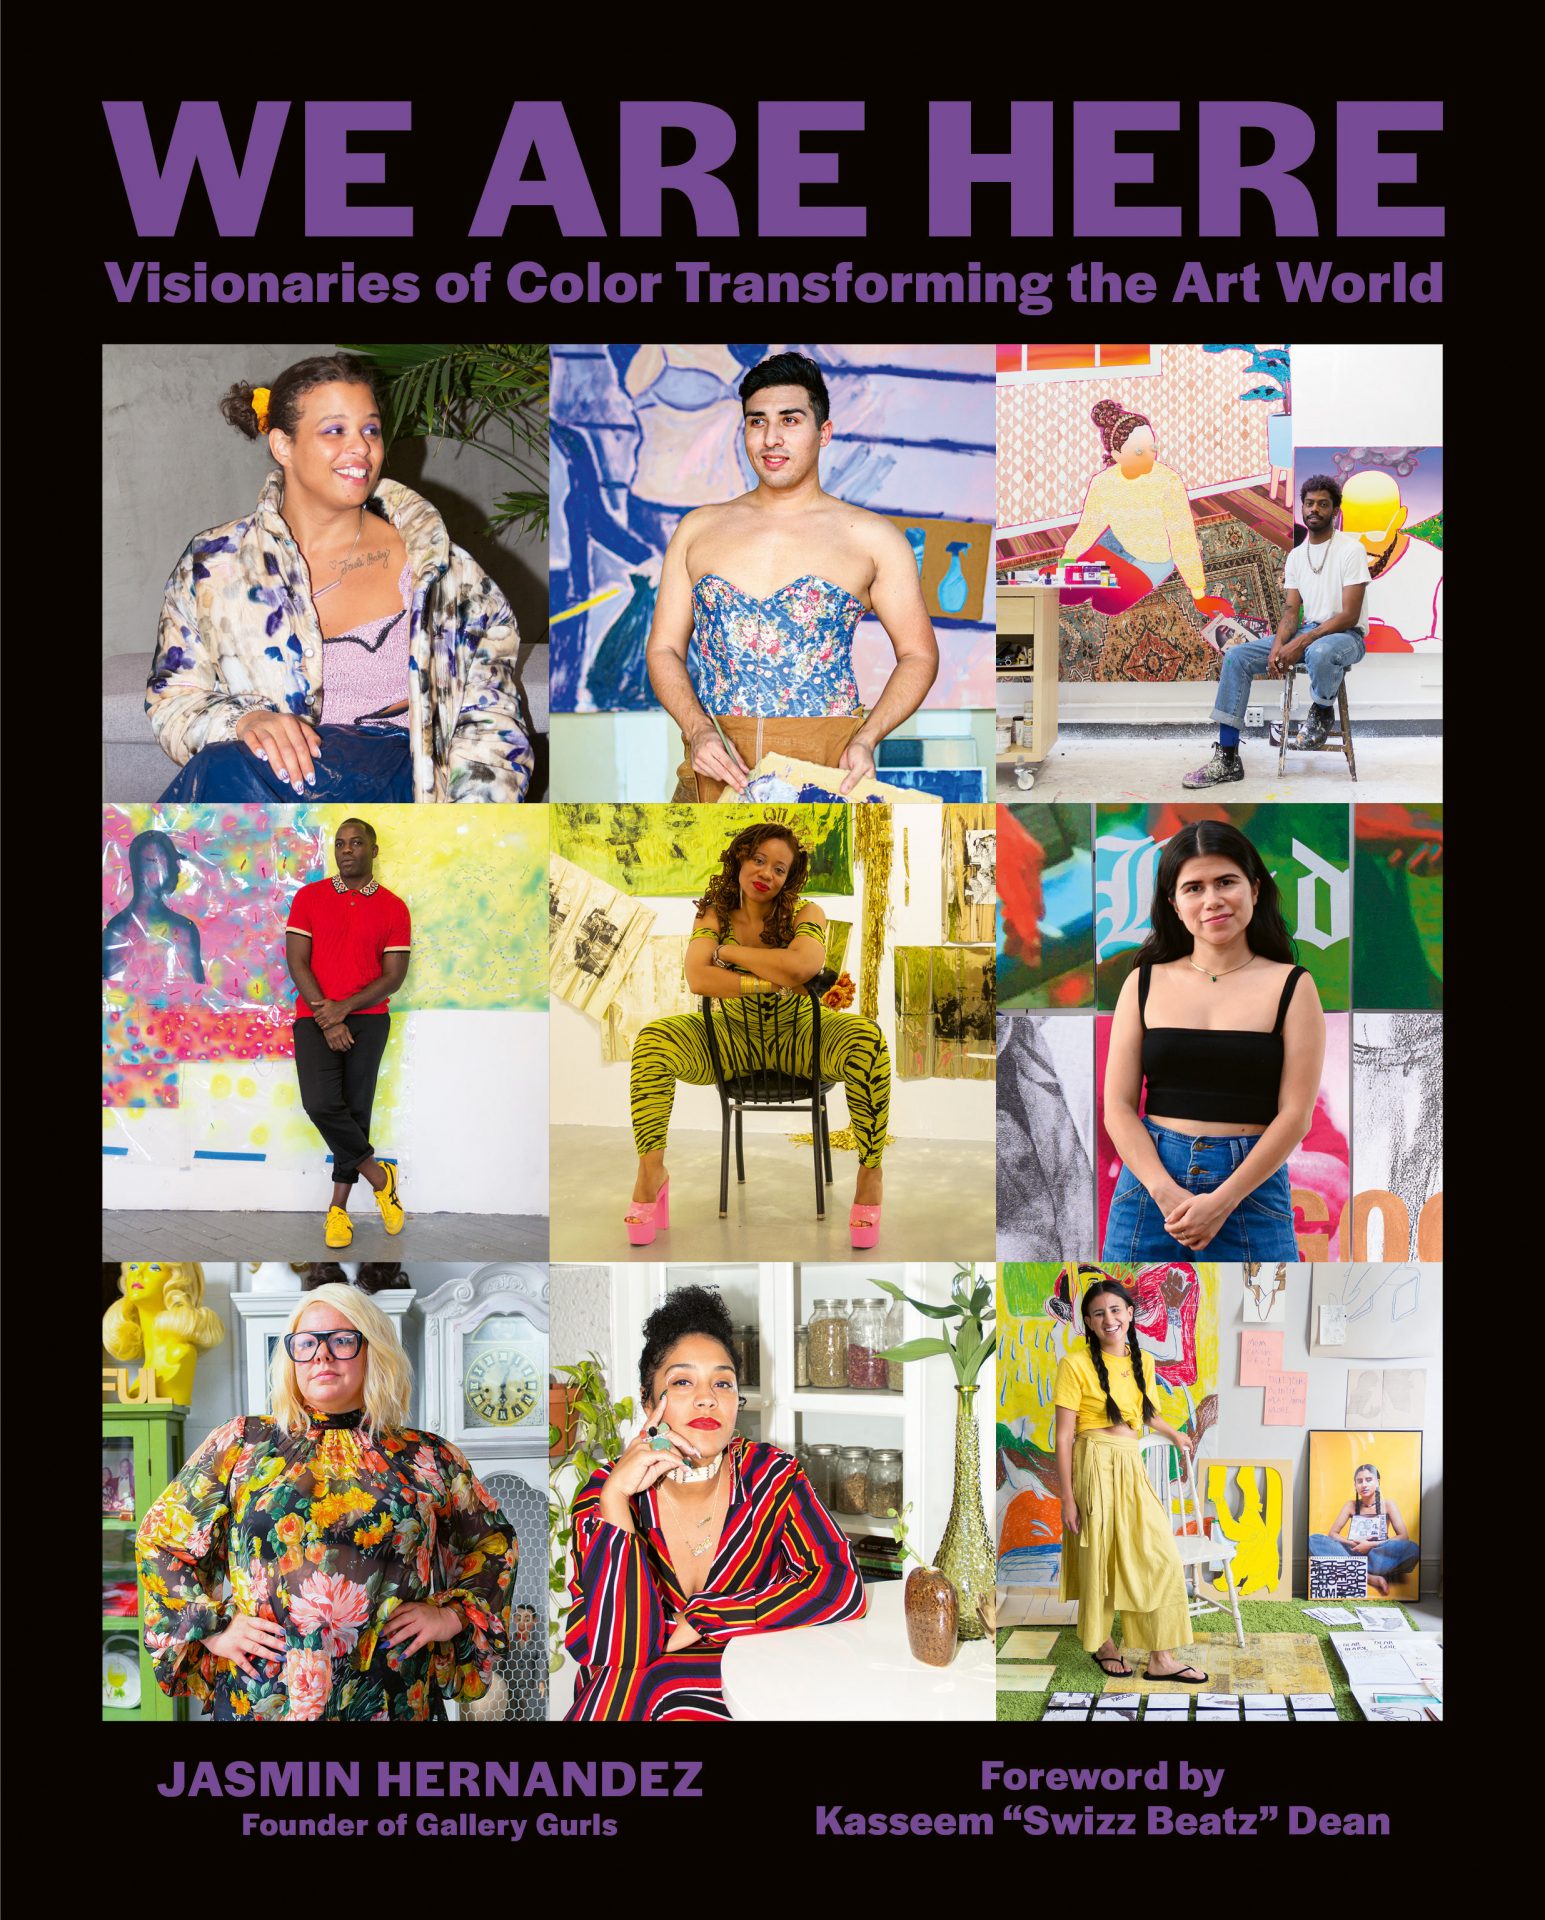 We Are Here: Visionaries of Color Transforming the Art World